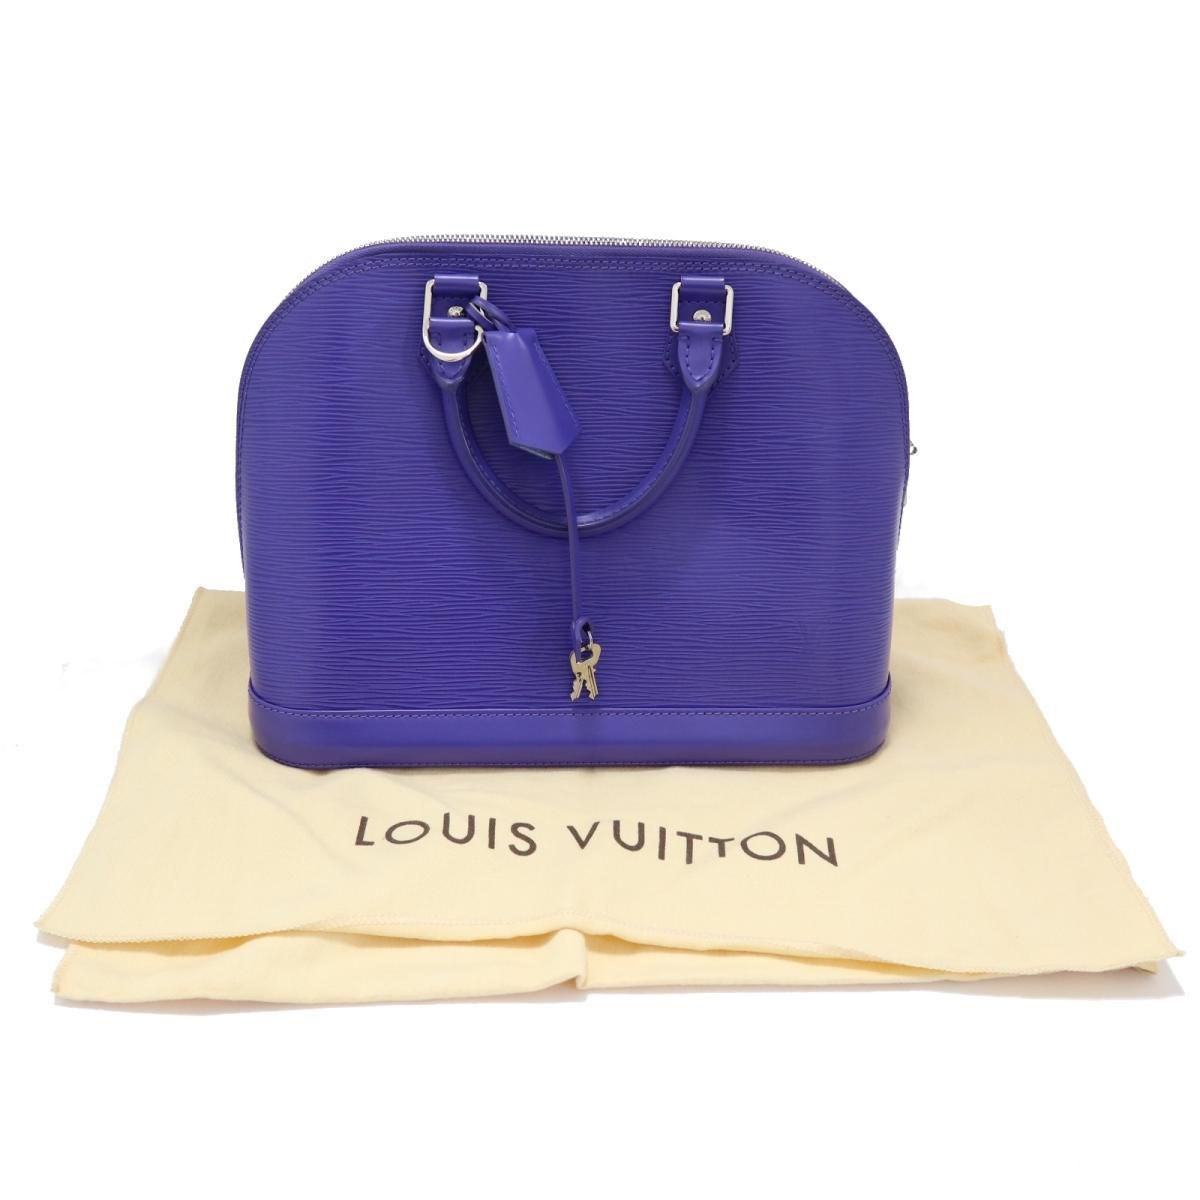 Louis Vuitton Auth Alma Pm Hand Bag Epi Leather Figue / Violet Used Vintage in Purple - Lyst